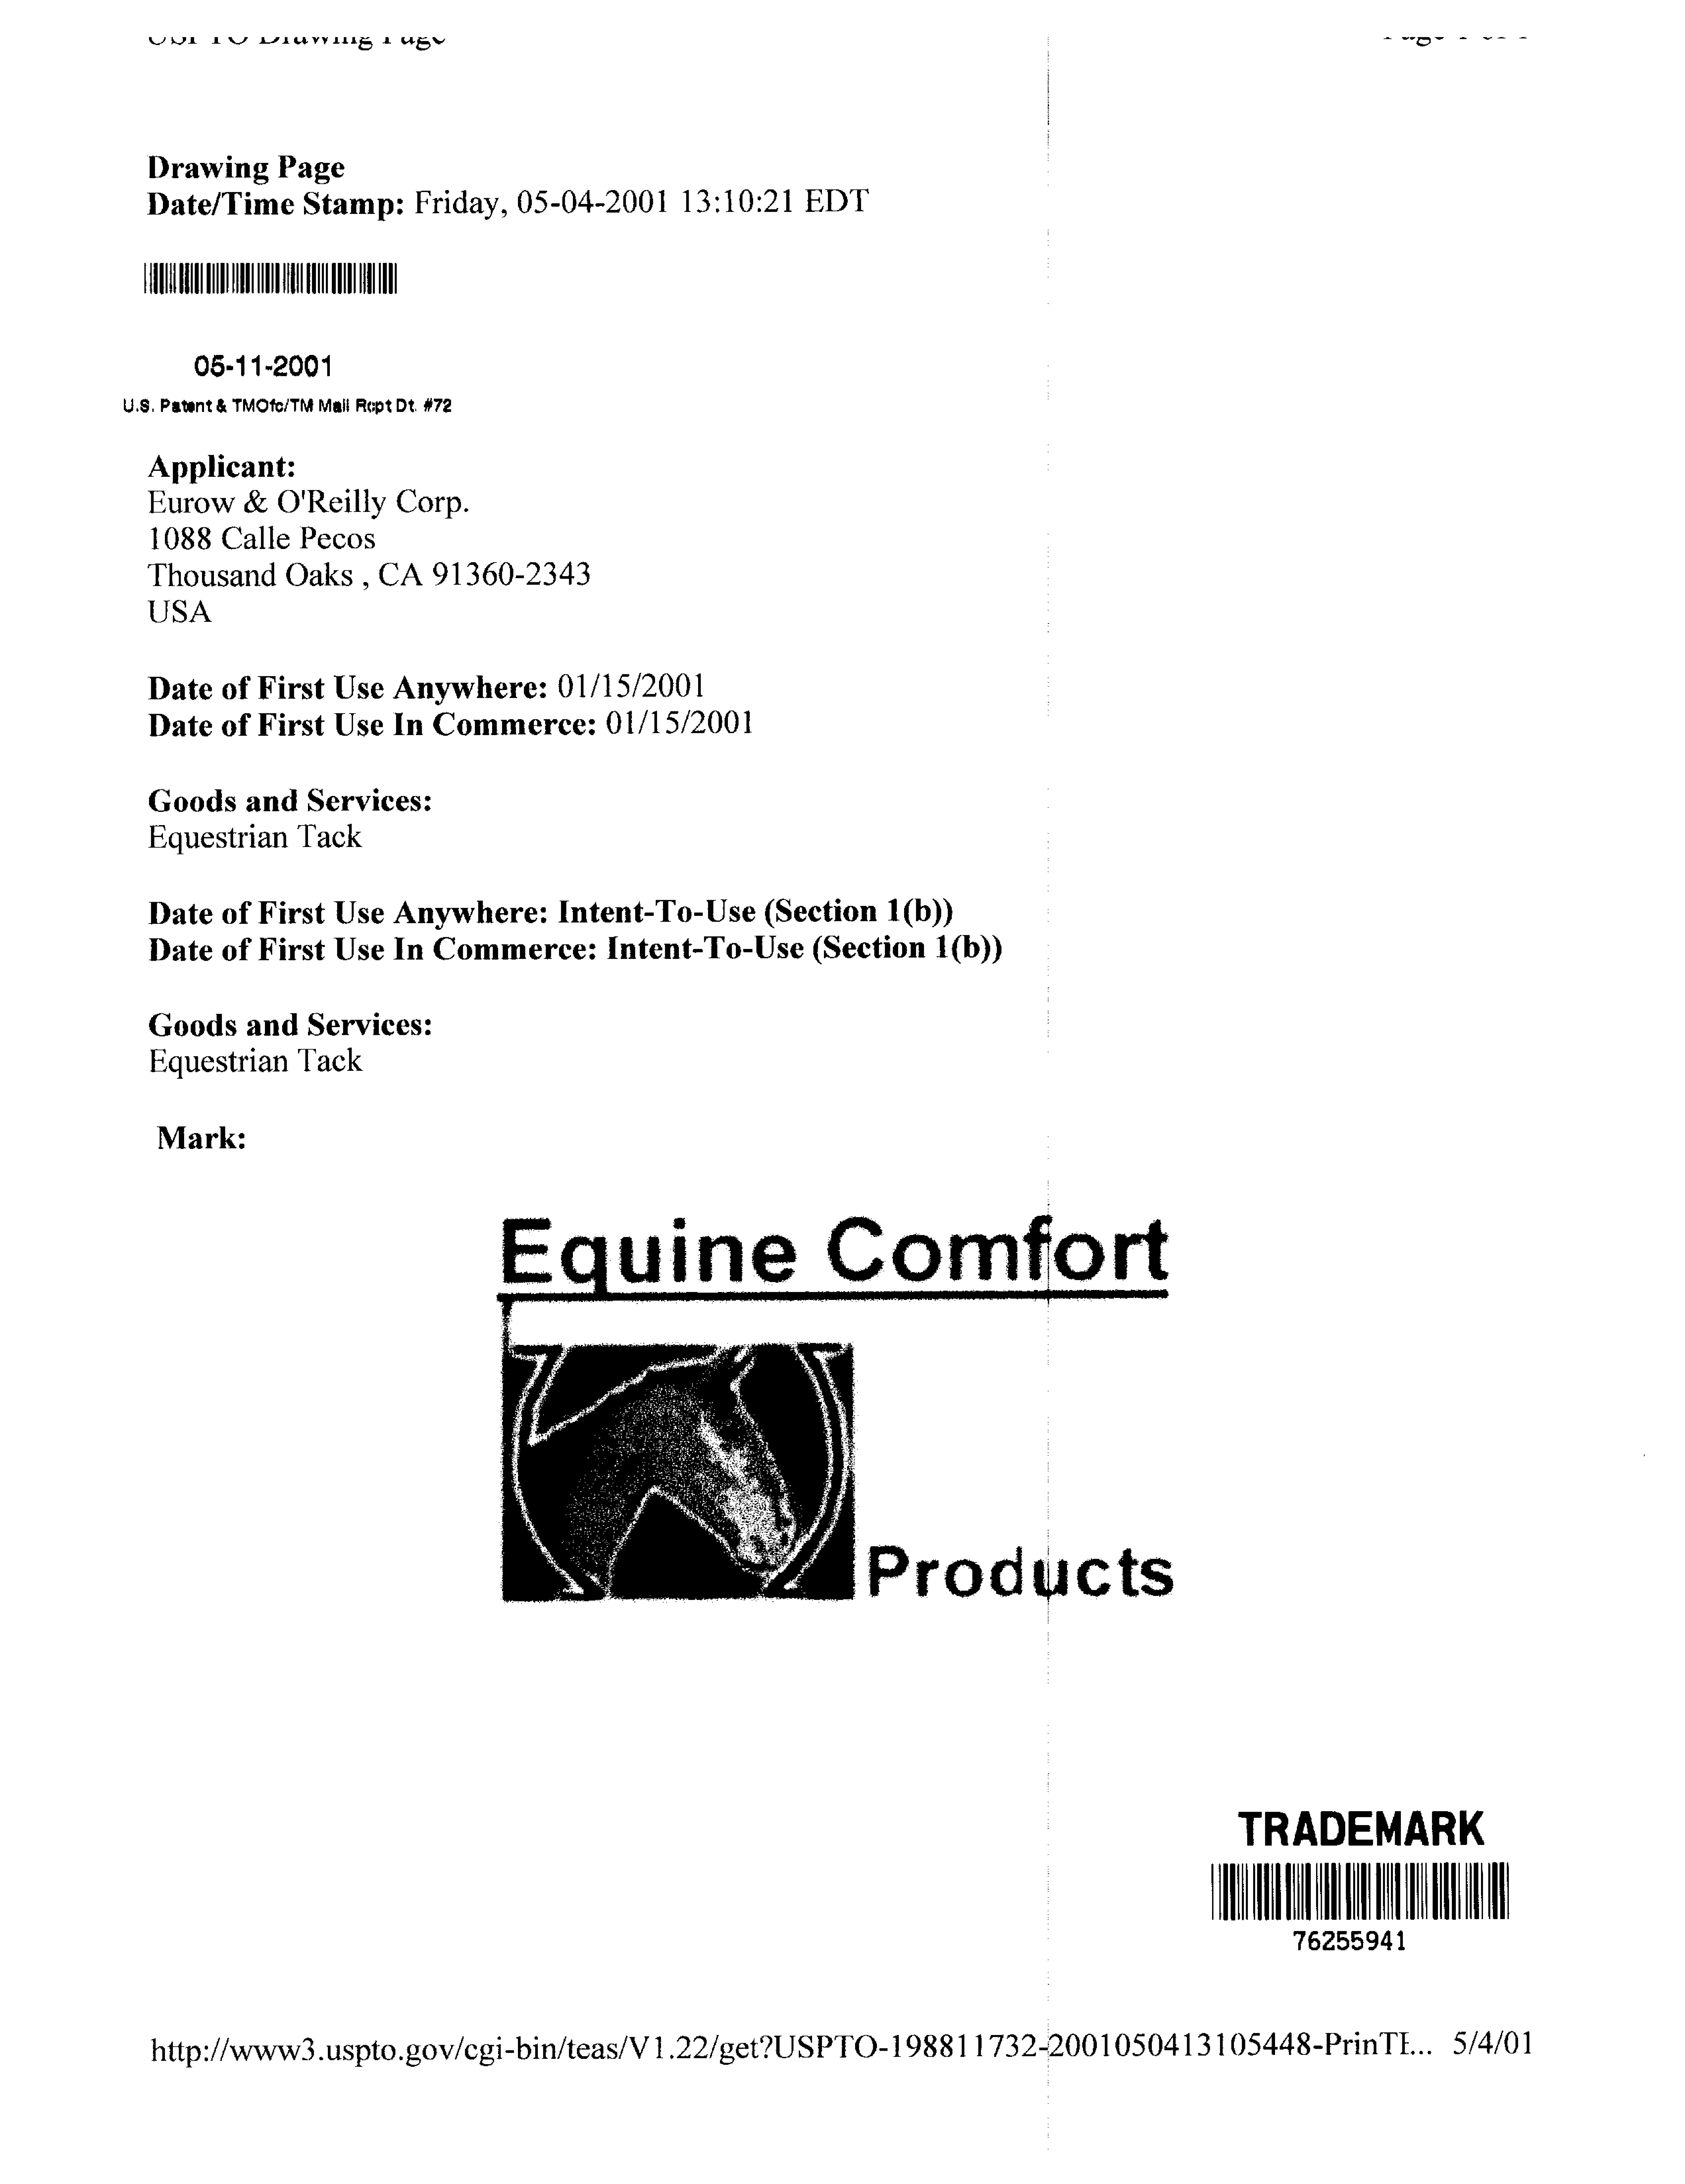  EQUINE COMFORT PRODUCTS